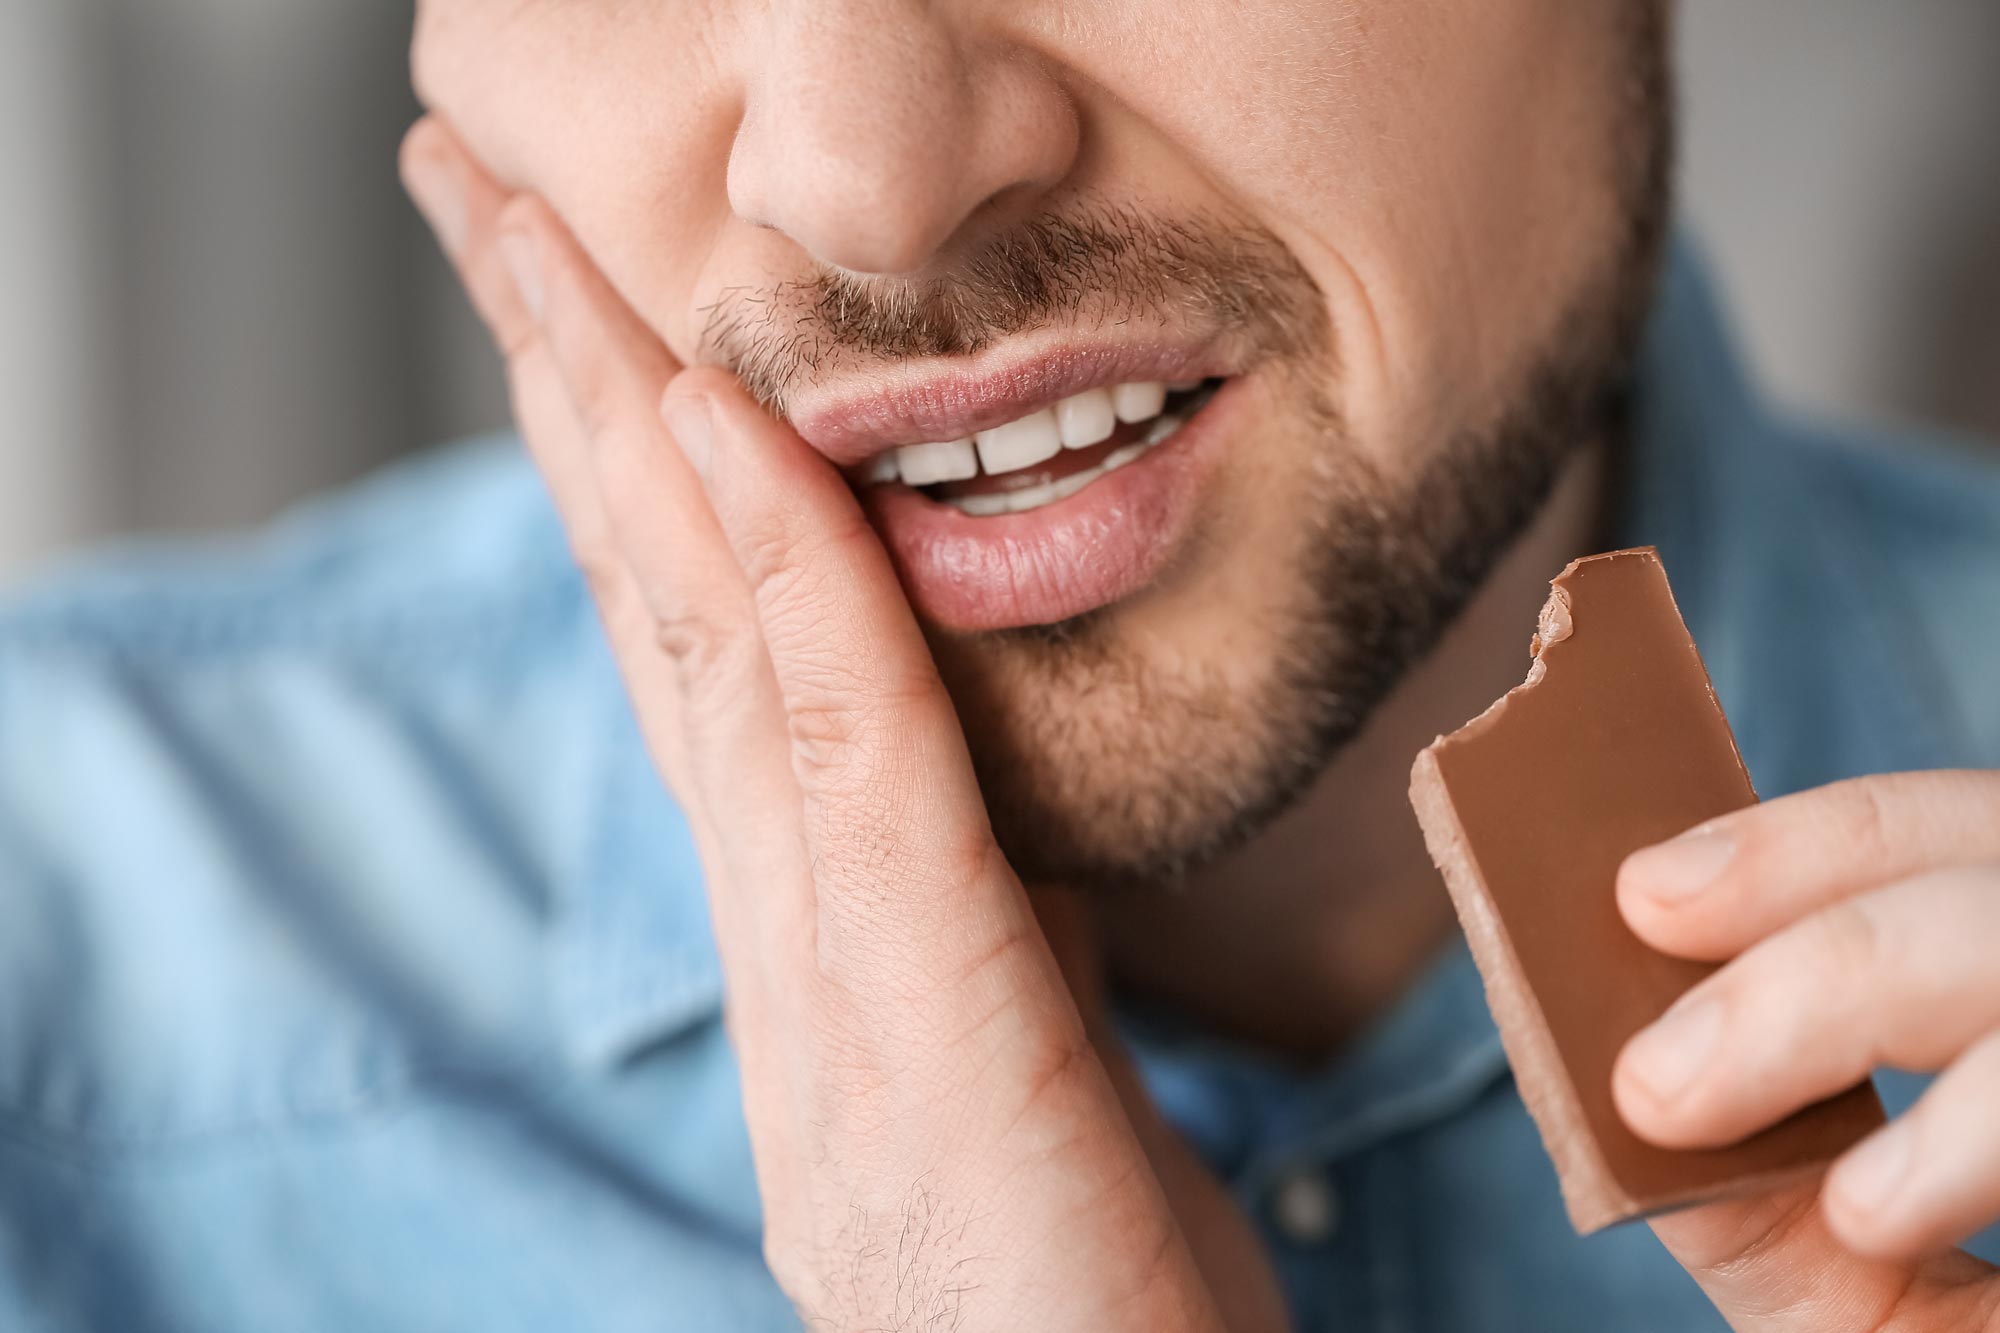 Man with sore tooth while eating some chocolate